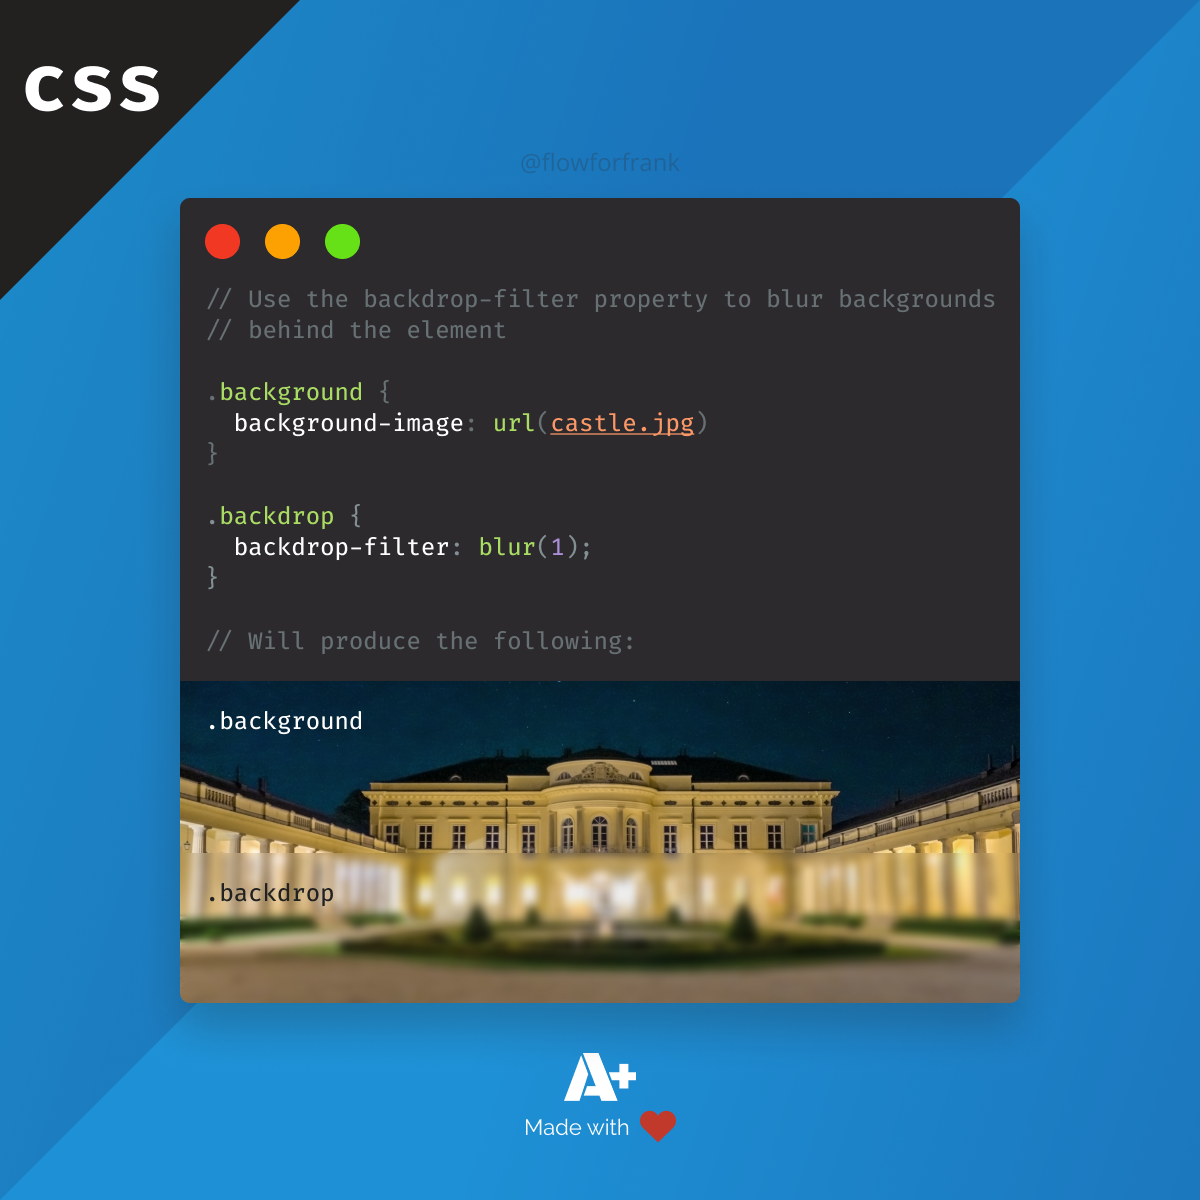 How to Blur Background Behind Elements in CSS